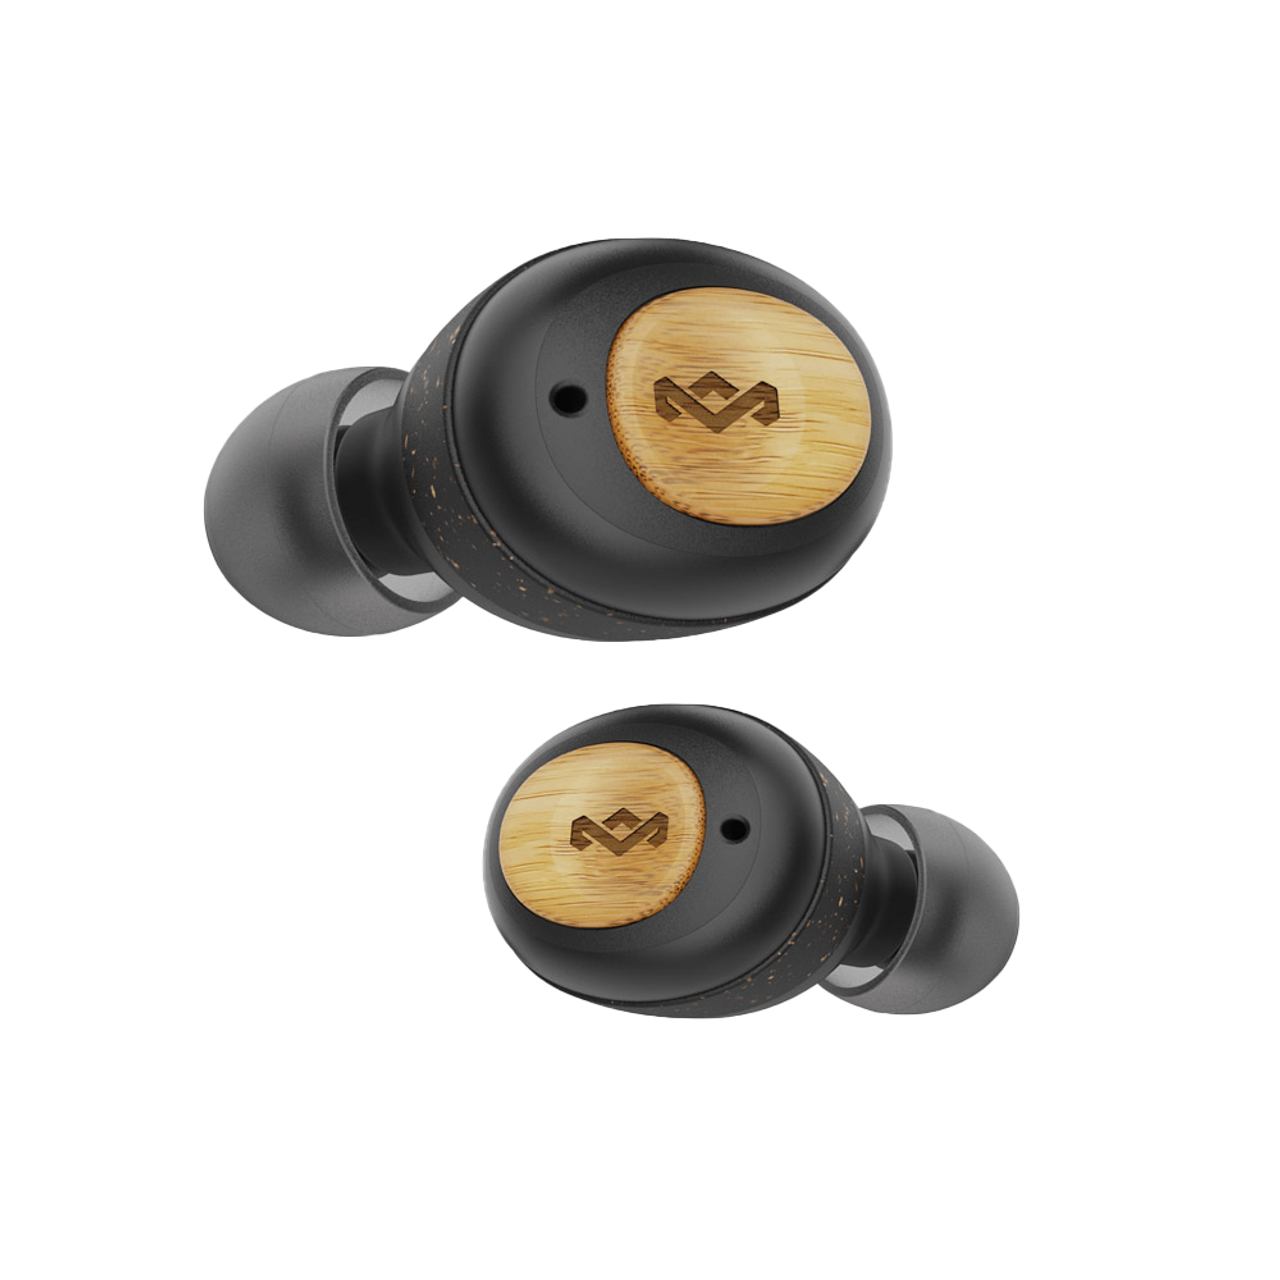 Wireless Earbuds and Charging Case Set, Size: One size, Gold